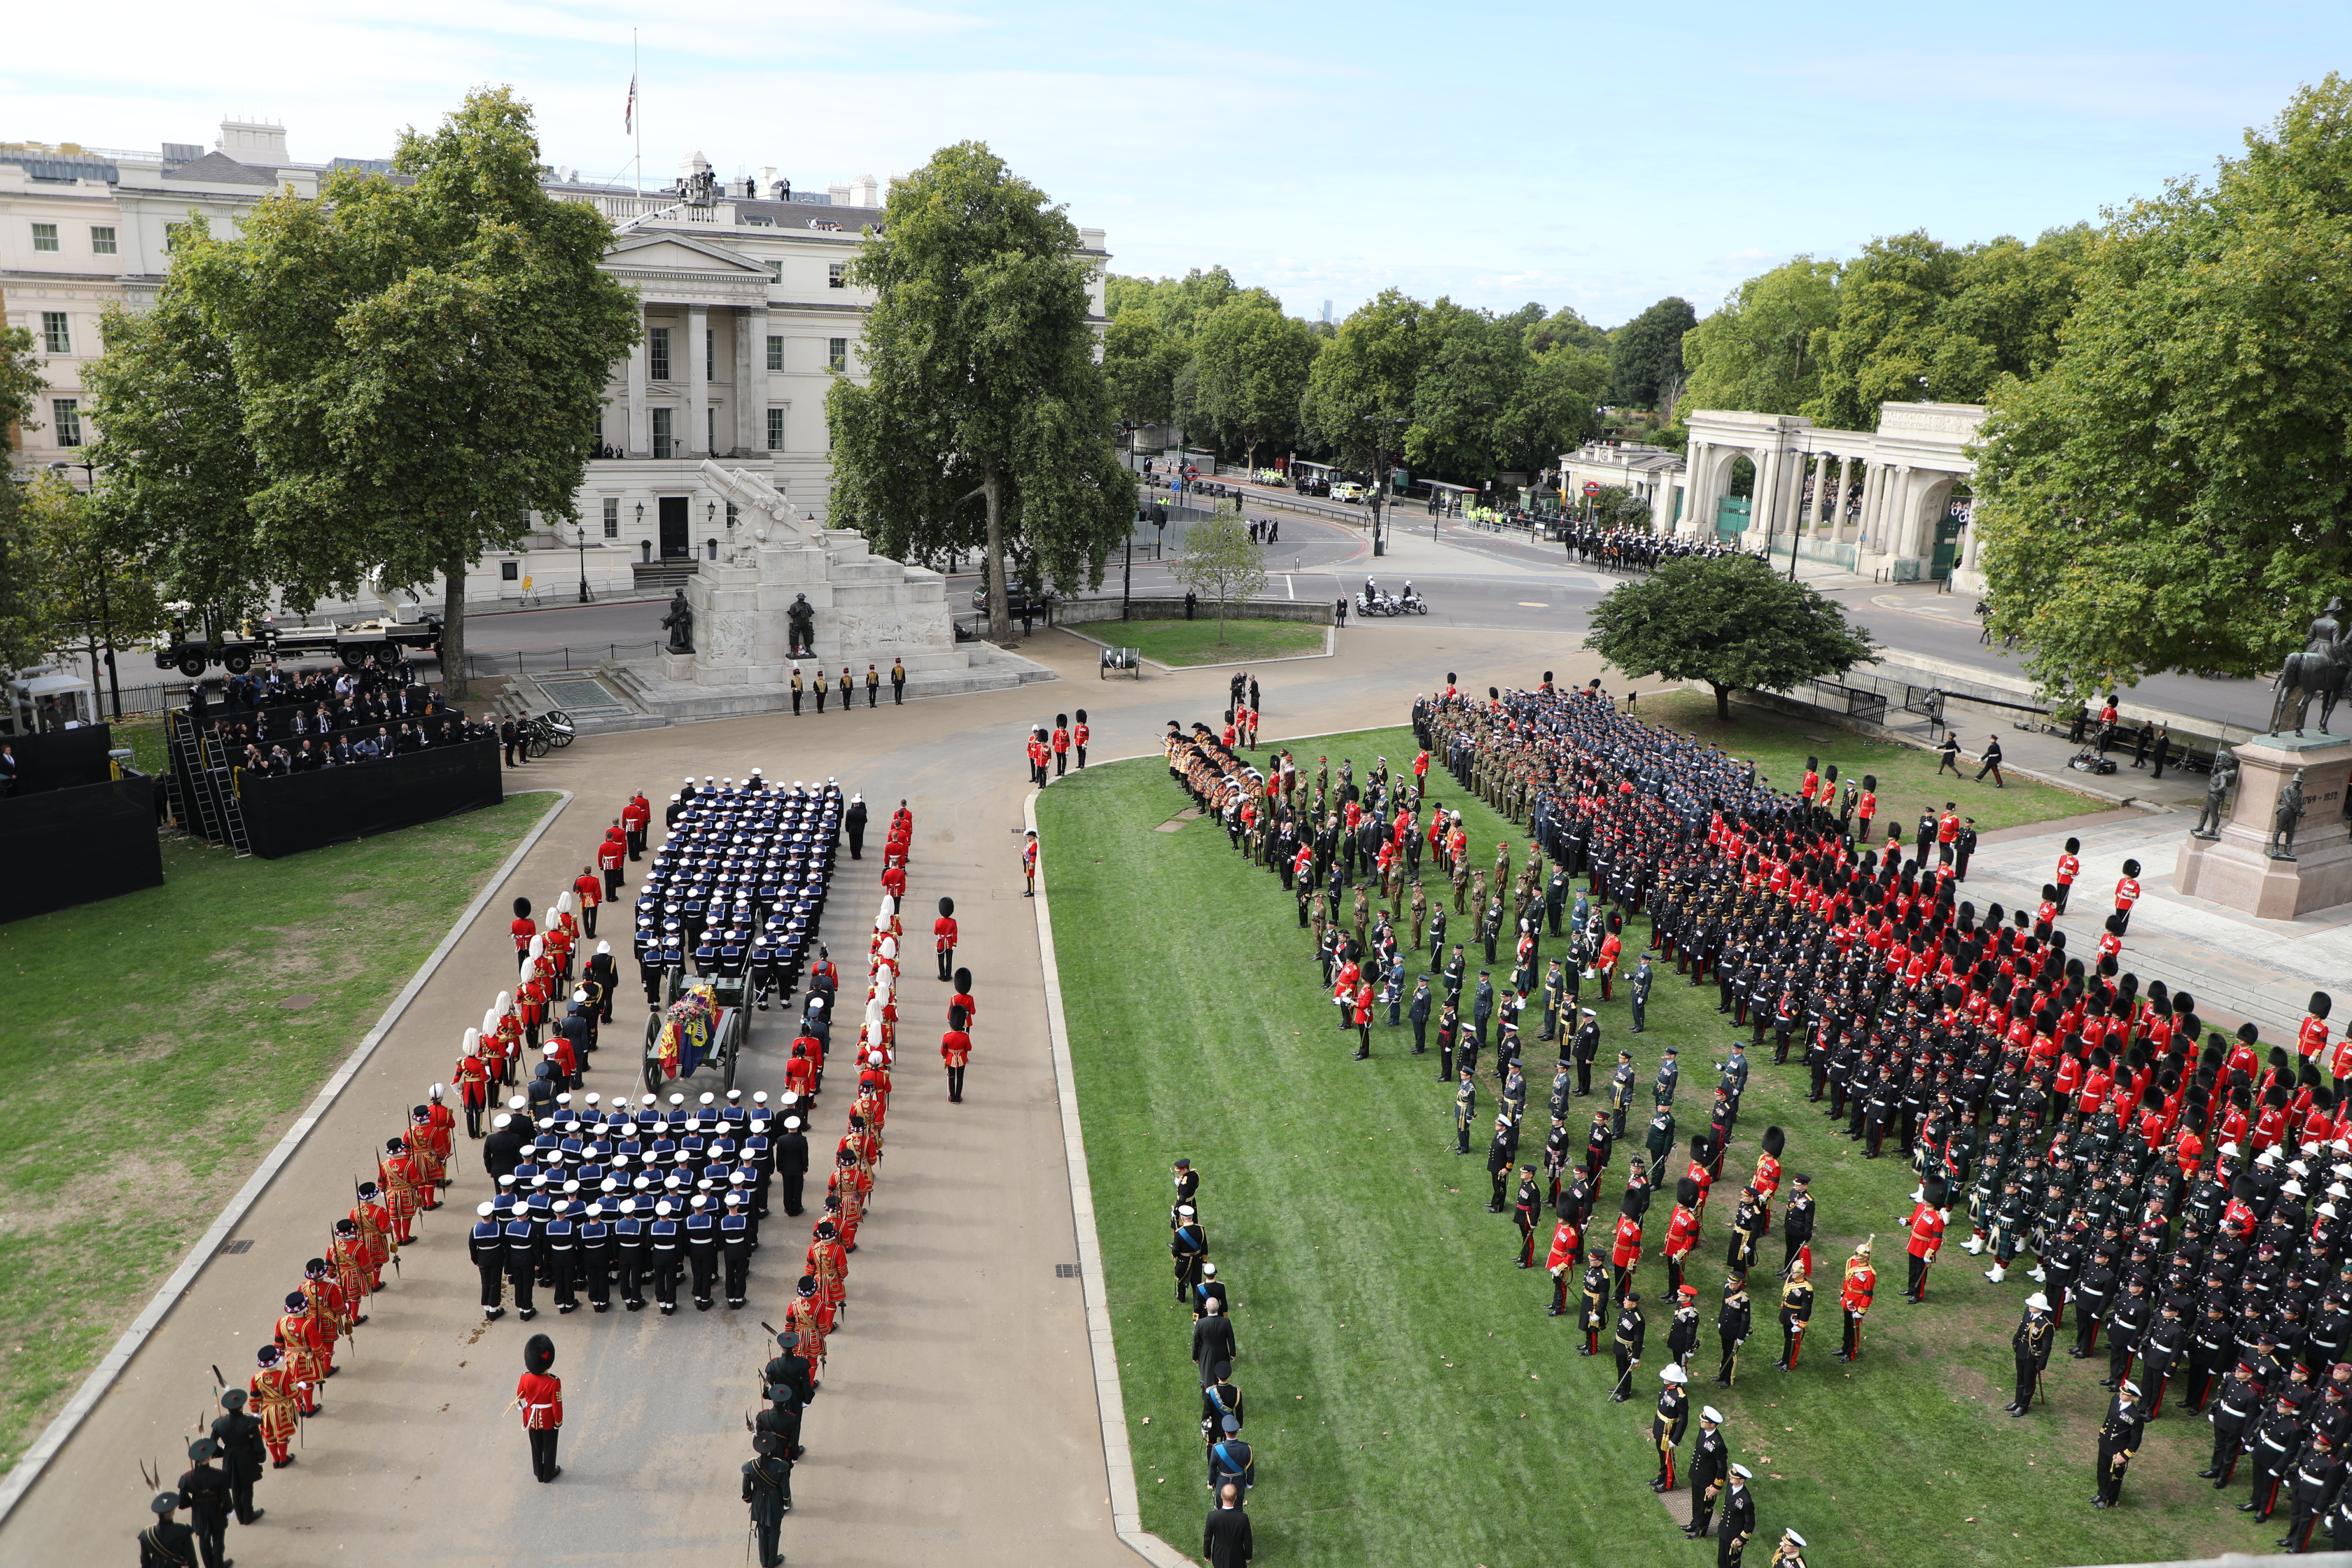 Image shows the Armed Forces on parade towards Buckingham Palace.